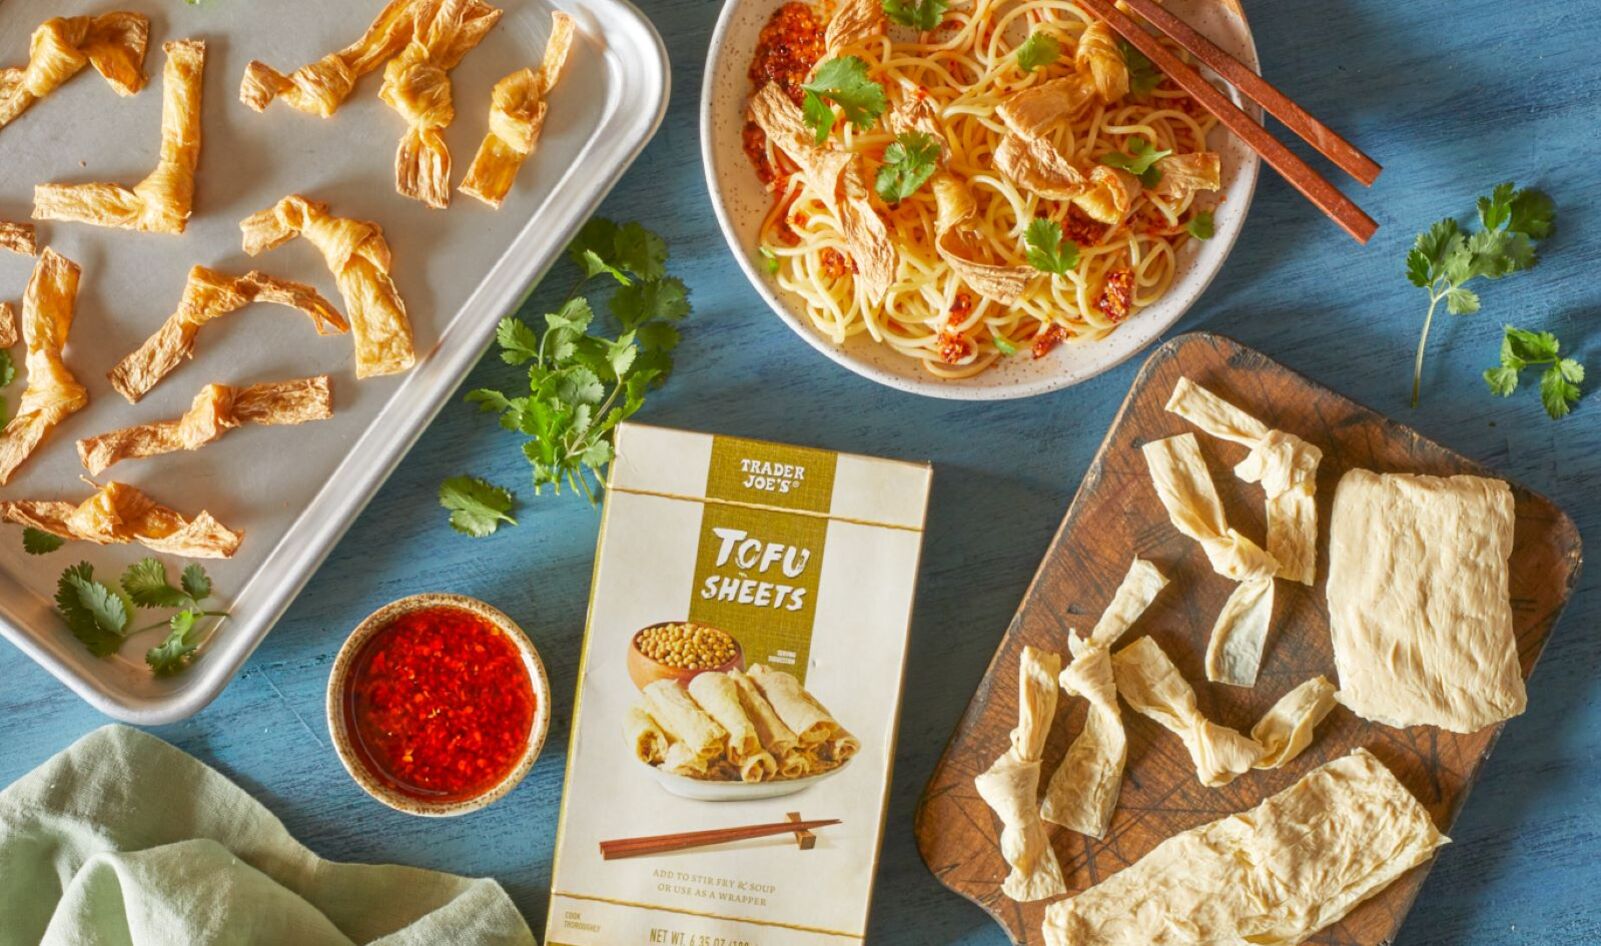 Trader Joe’s New Tofu Sheets Have Created a Social Media Frenzy. But What Even Are They?